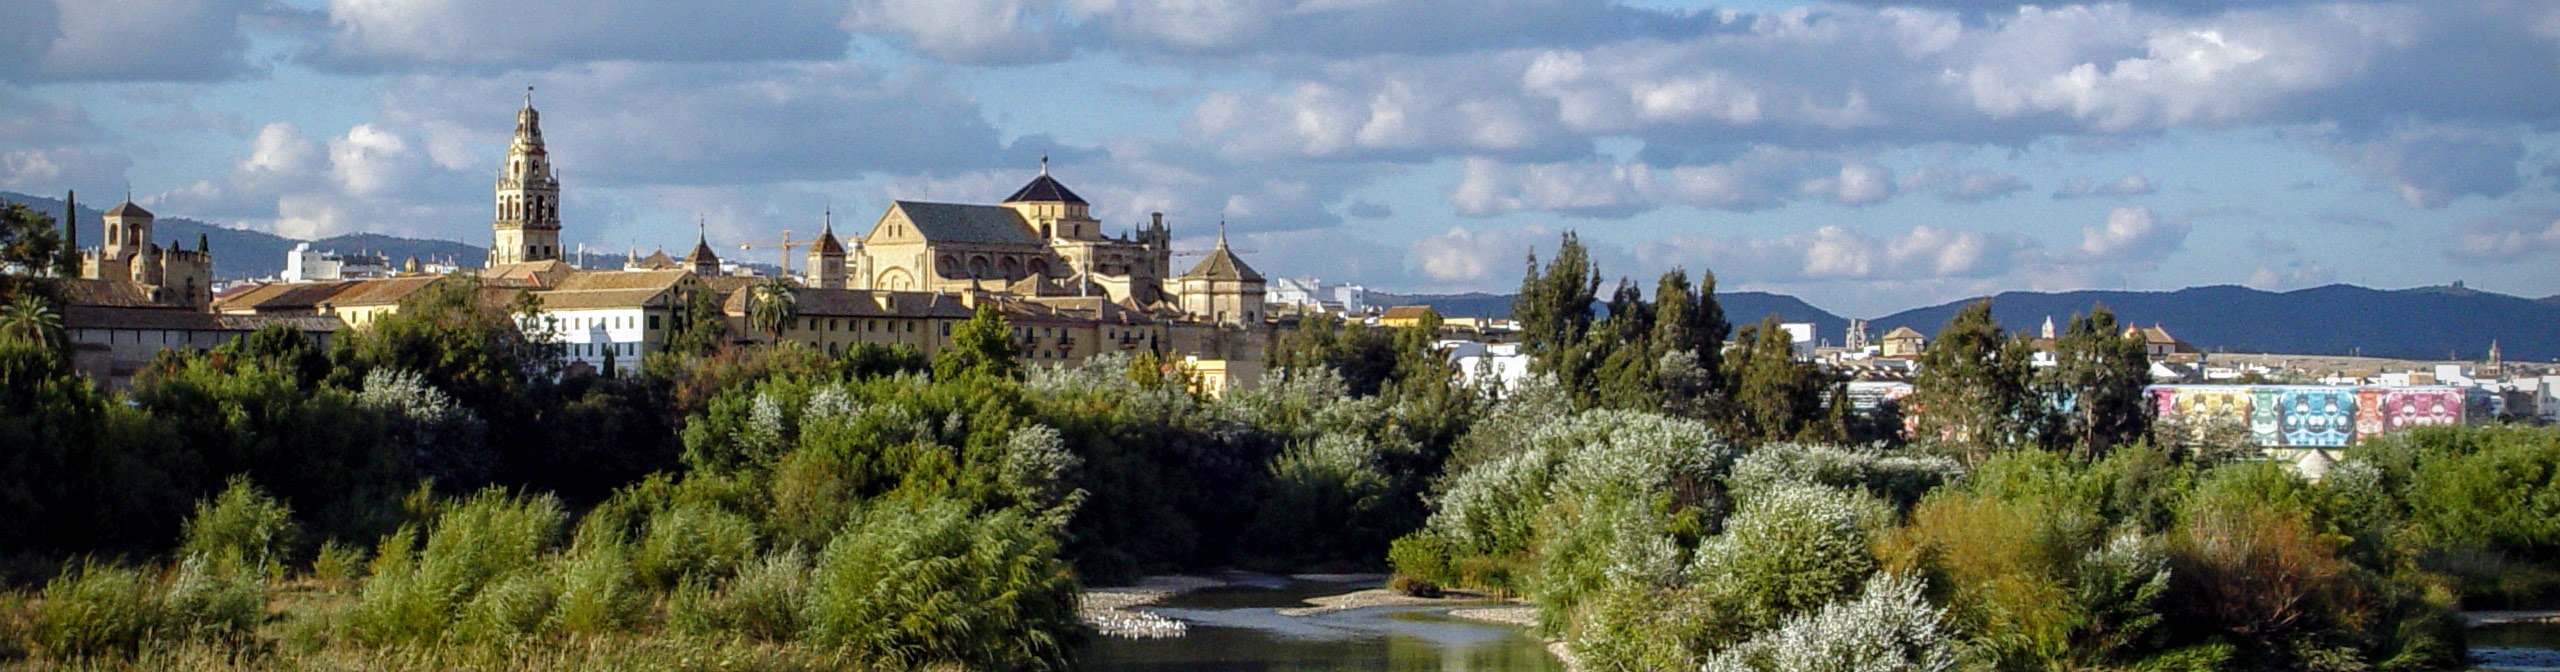 View of the cathedral and mosque over the river guadalquivir in Cordoba in Andalucia